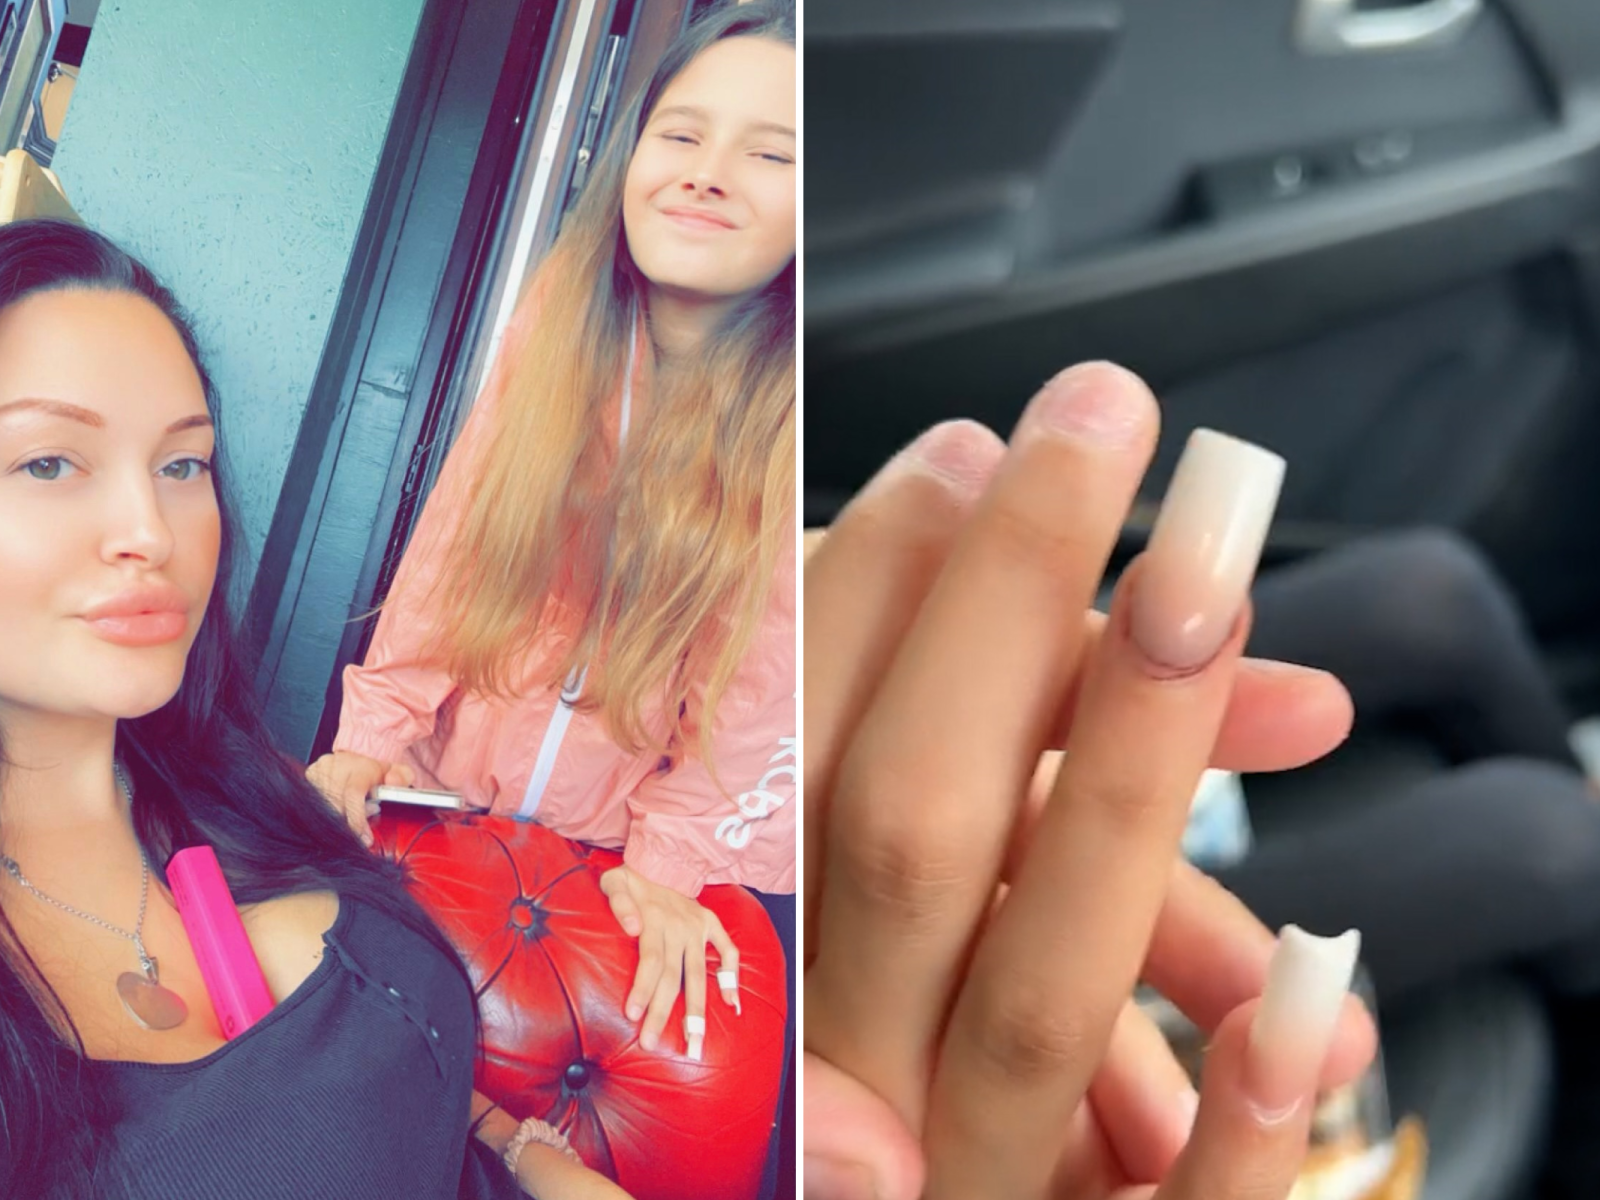 Mom Defends 10-Year-Old Daughter's Acrylic Nails Despite Painful